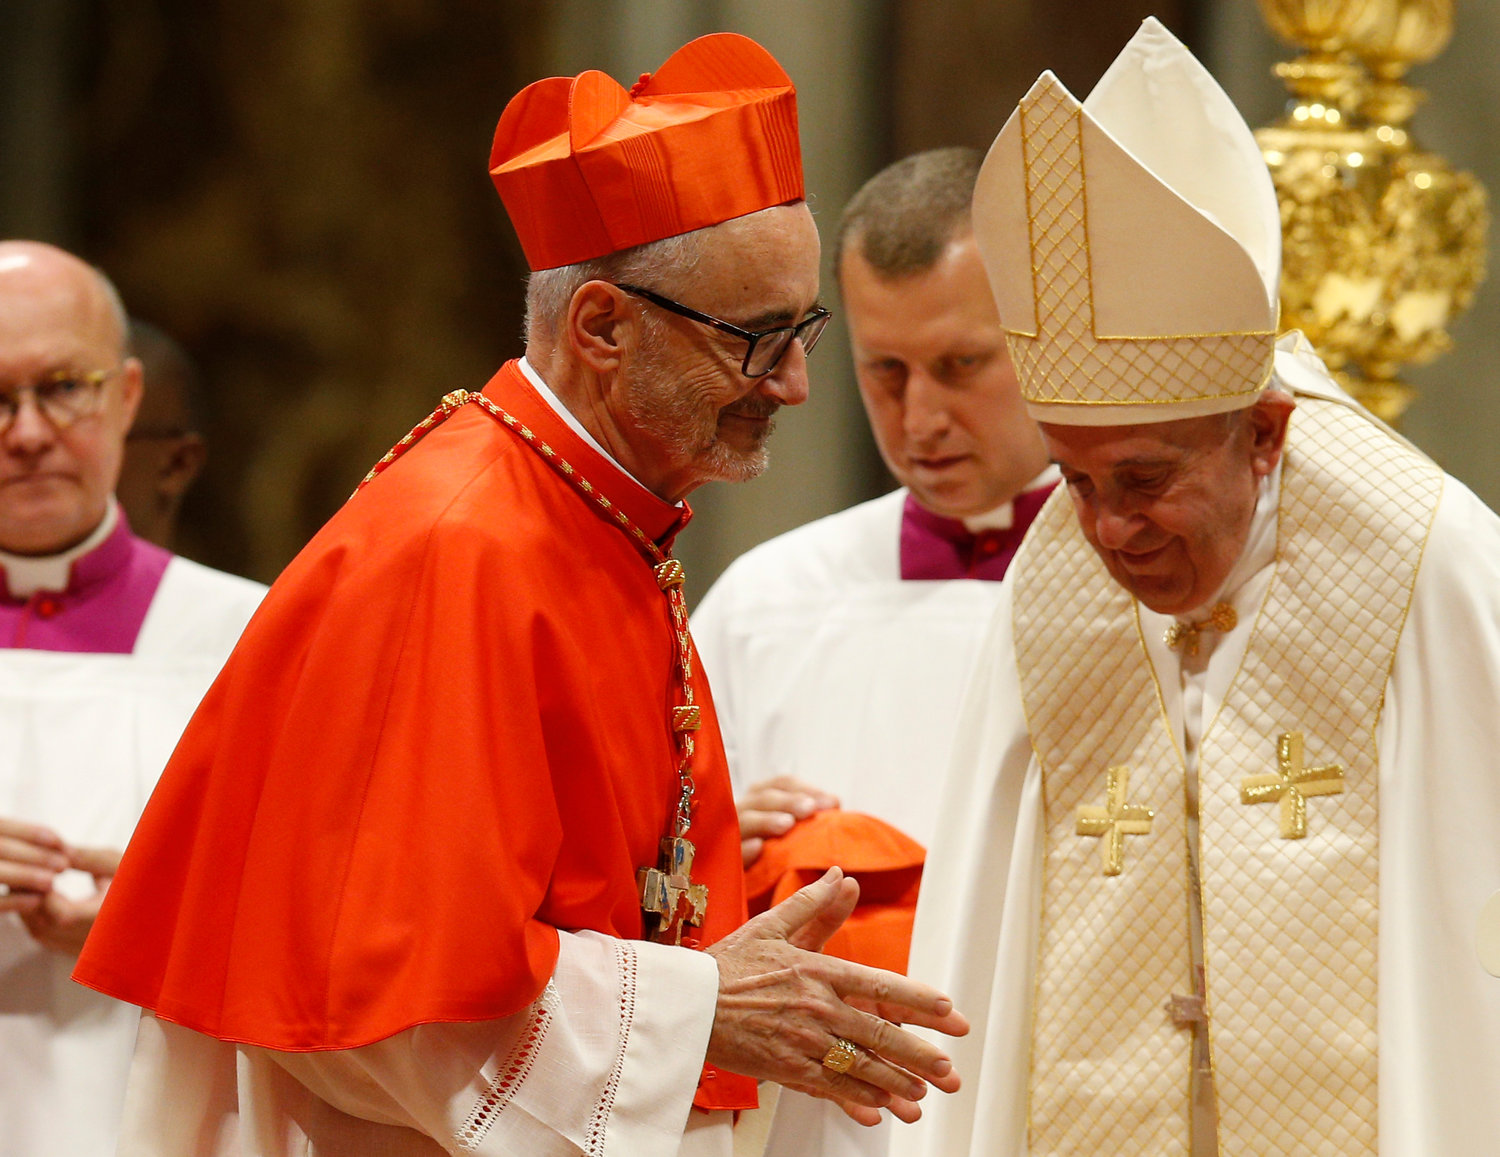 New Canadian Cardinal Michael Czerny arrives for a consistory led by Pope Francis for the creation of 13 new cardinals in St. Peter’s Basilica at the Vatican Oct. 5, 2019.